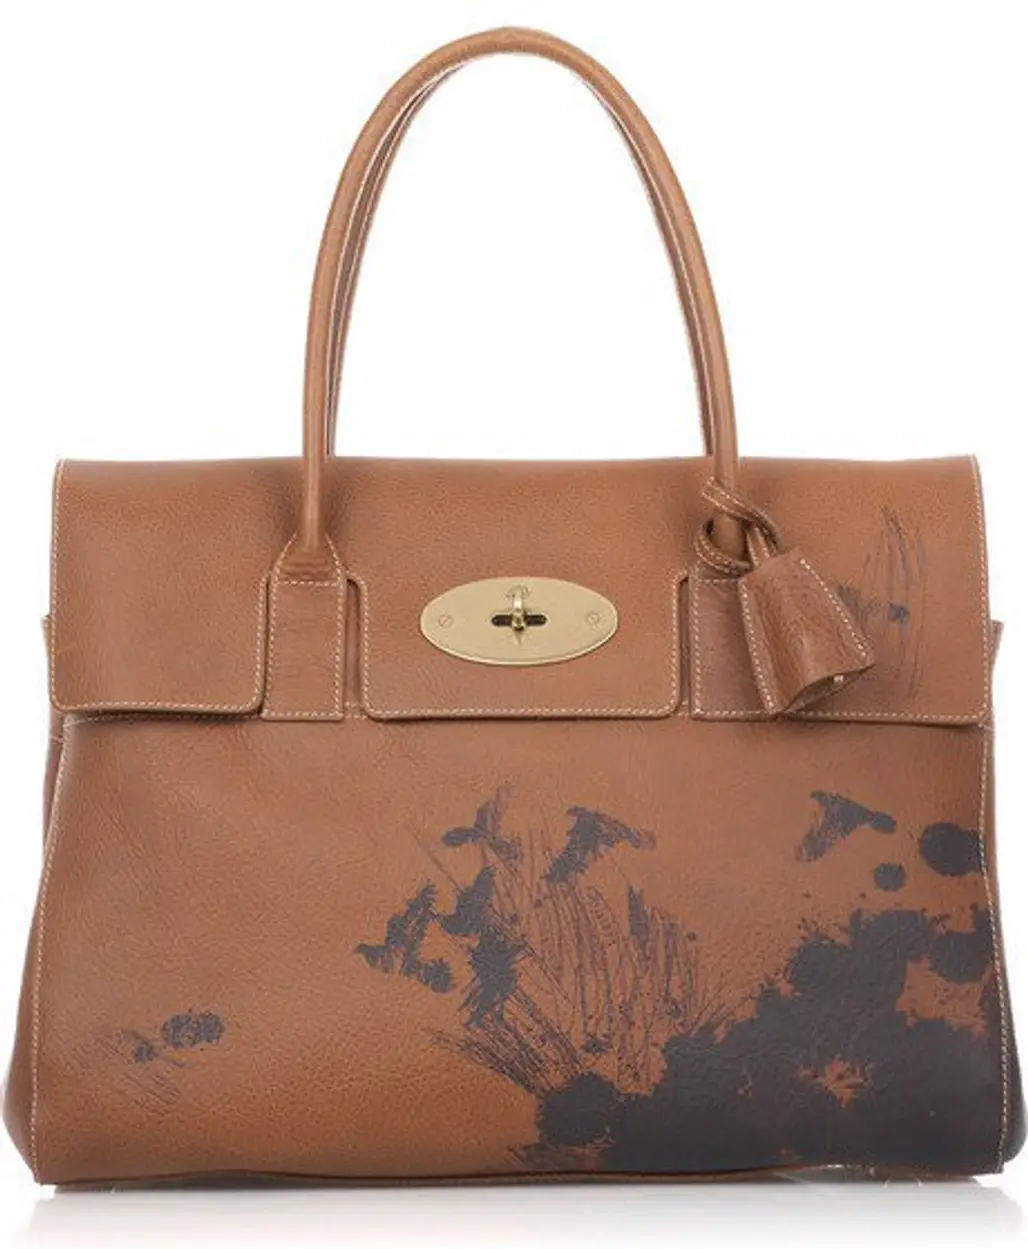 Mulberry Bayswater Ink-Print Leather Bag